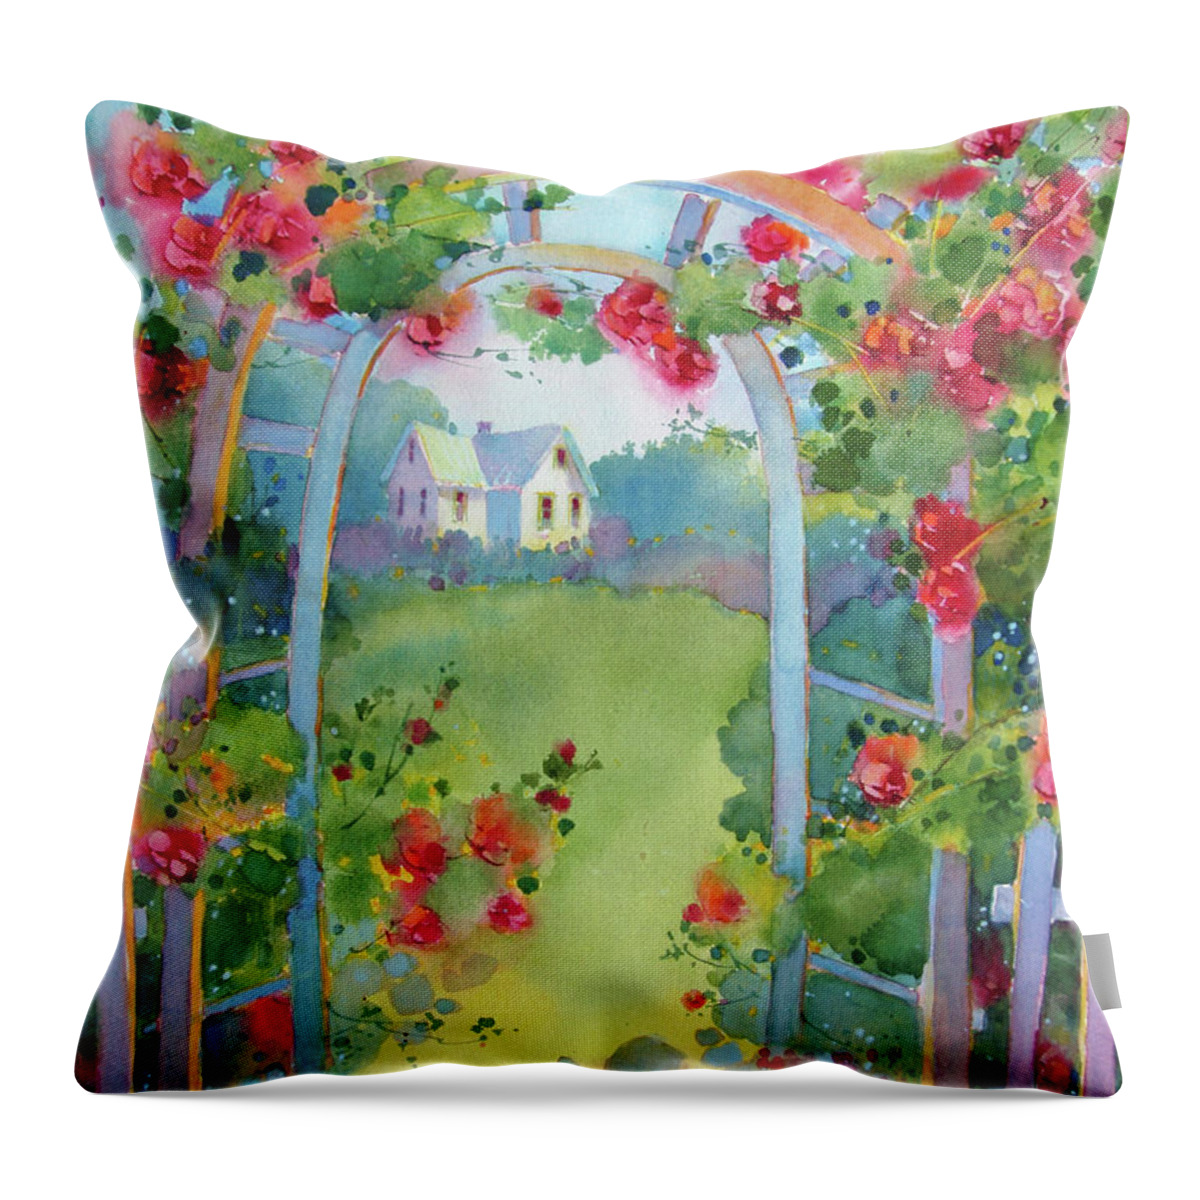 Rose Trellis Throw Pillow featuring the painting Framed by the Roses by Joyce Hicks